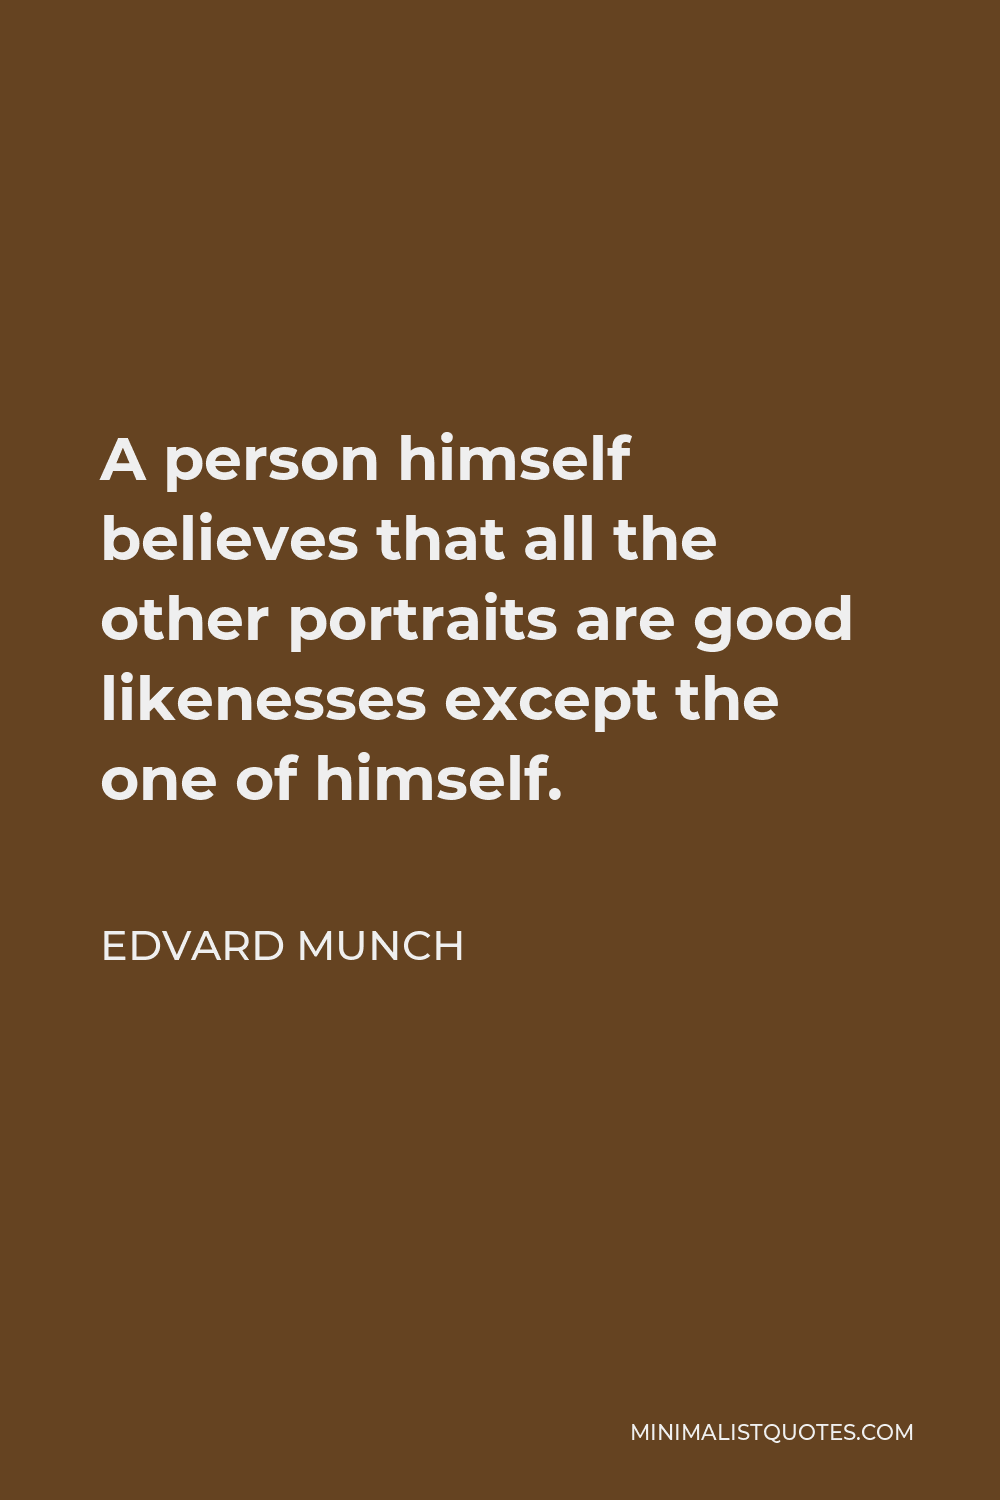 Edvard Munch Quote - A person himself believes that all the other portraits are good likenesses except the one of himself.